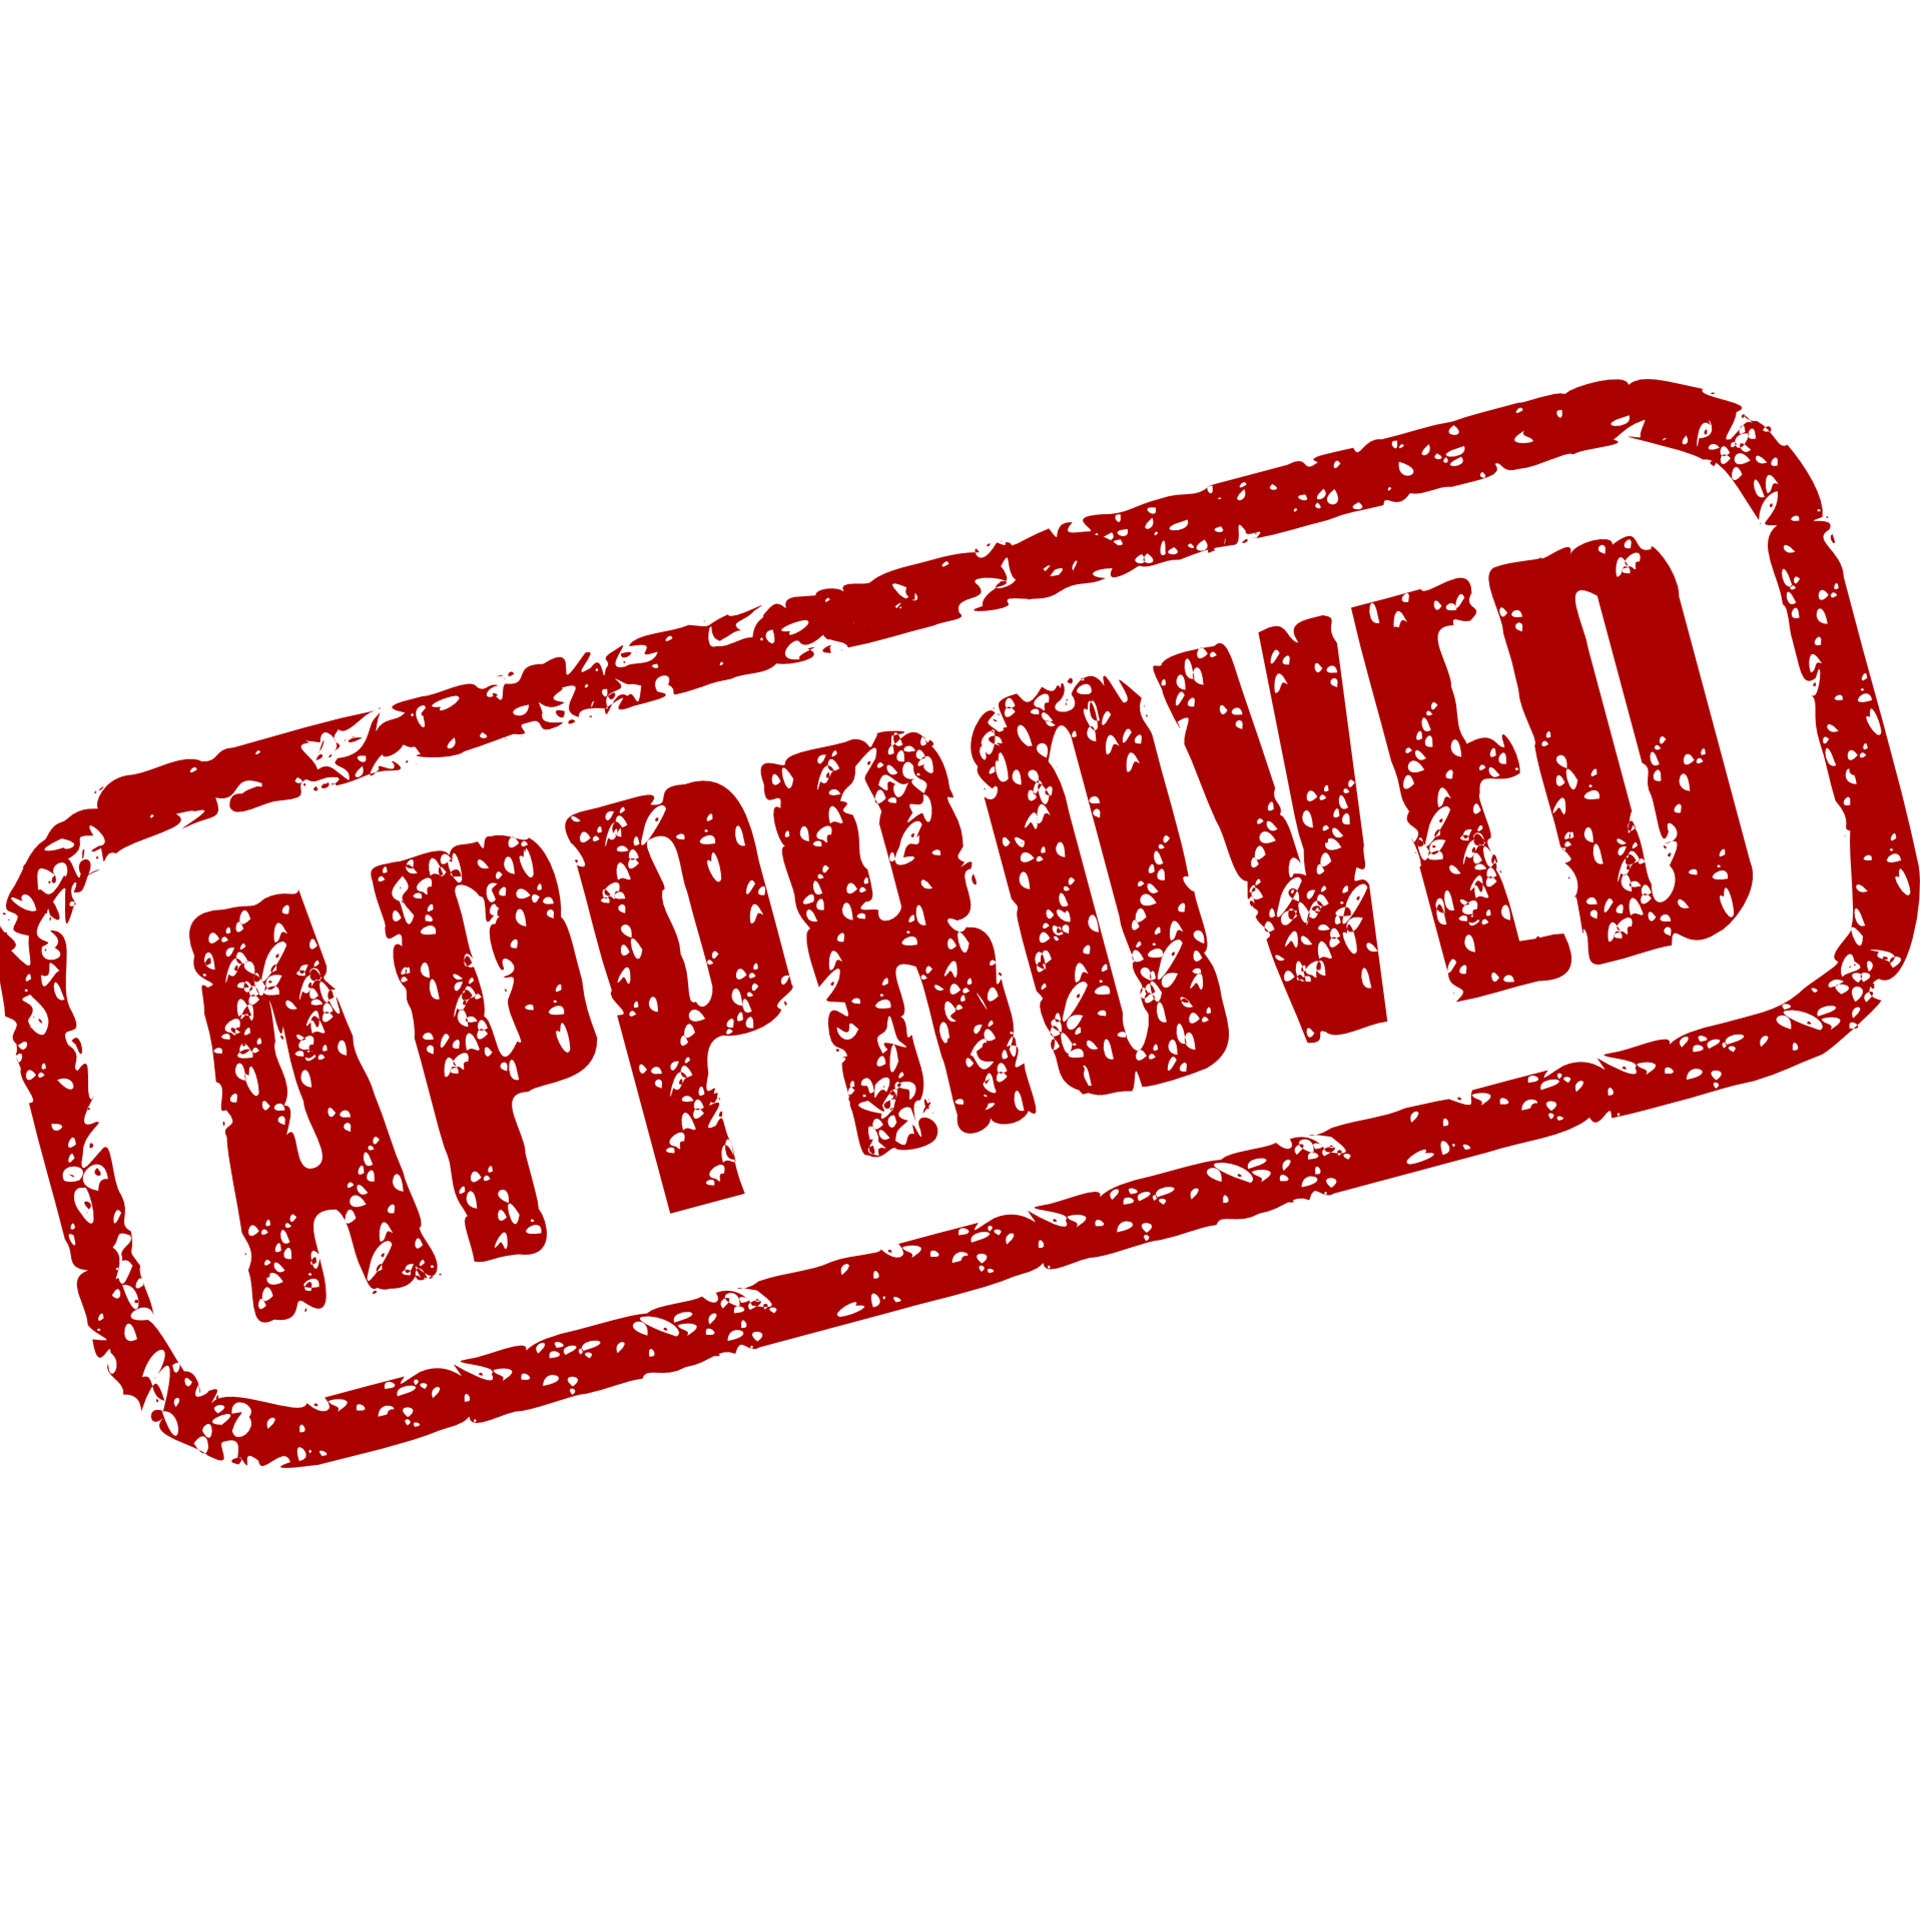 Routing and Proposal Approval